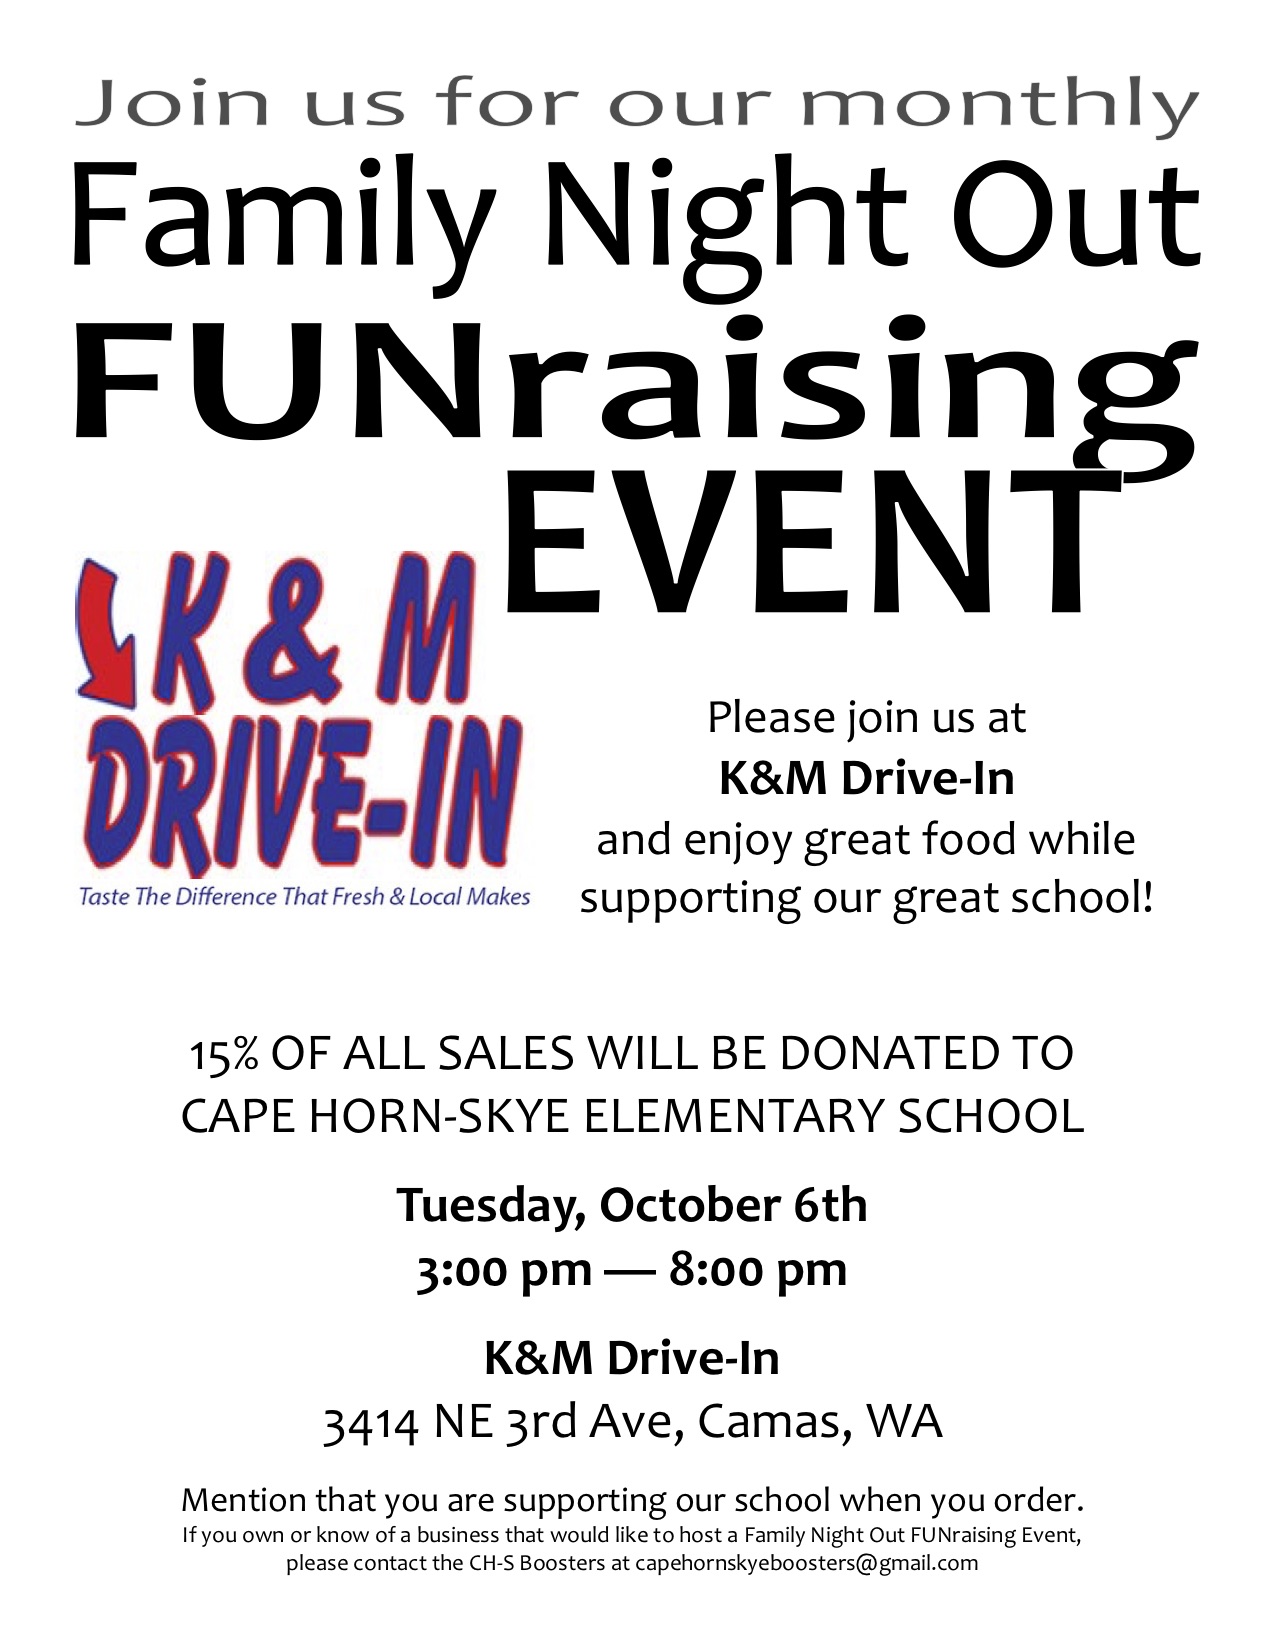 October 2020 Family Night Out Event Flyer: K&M Drive-In